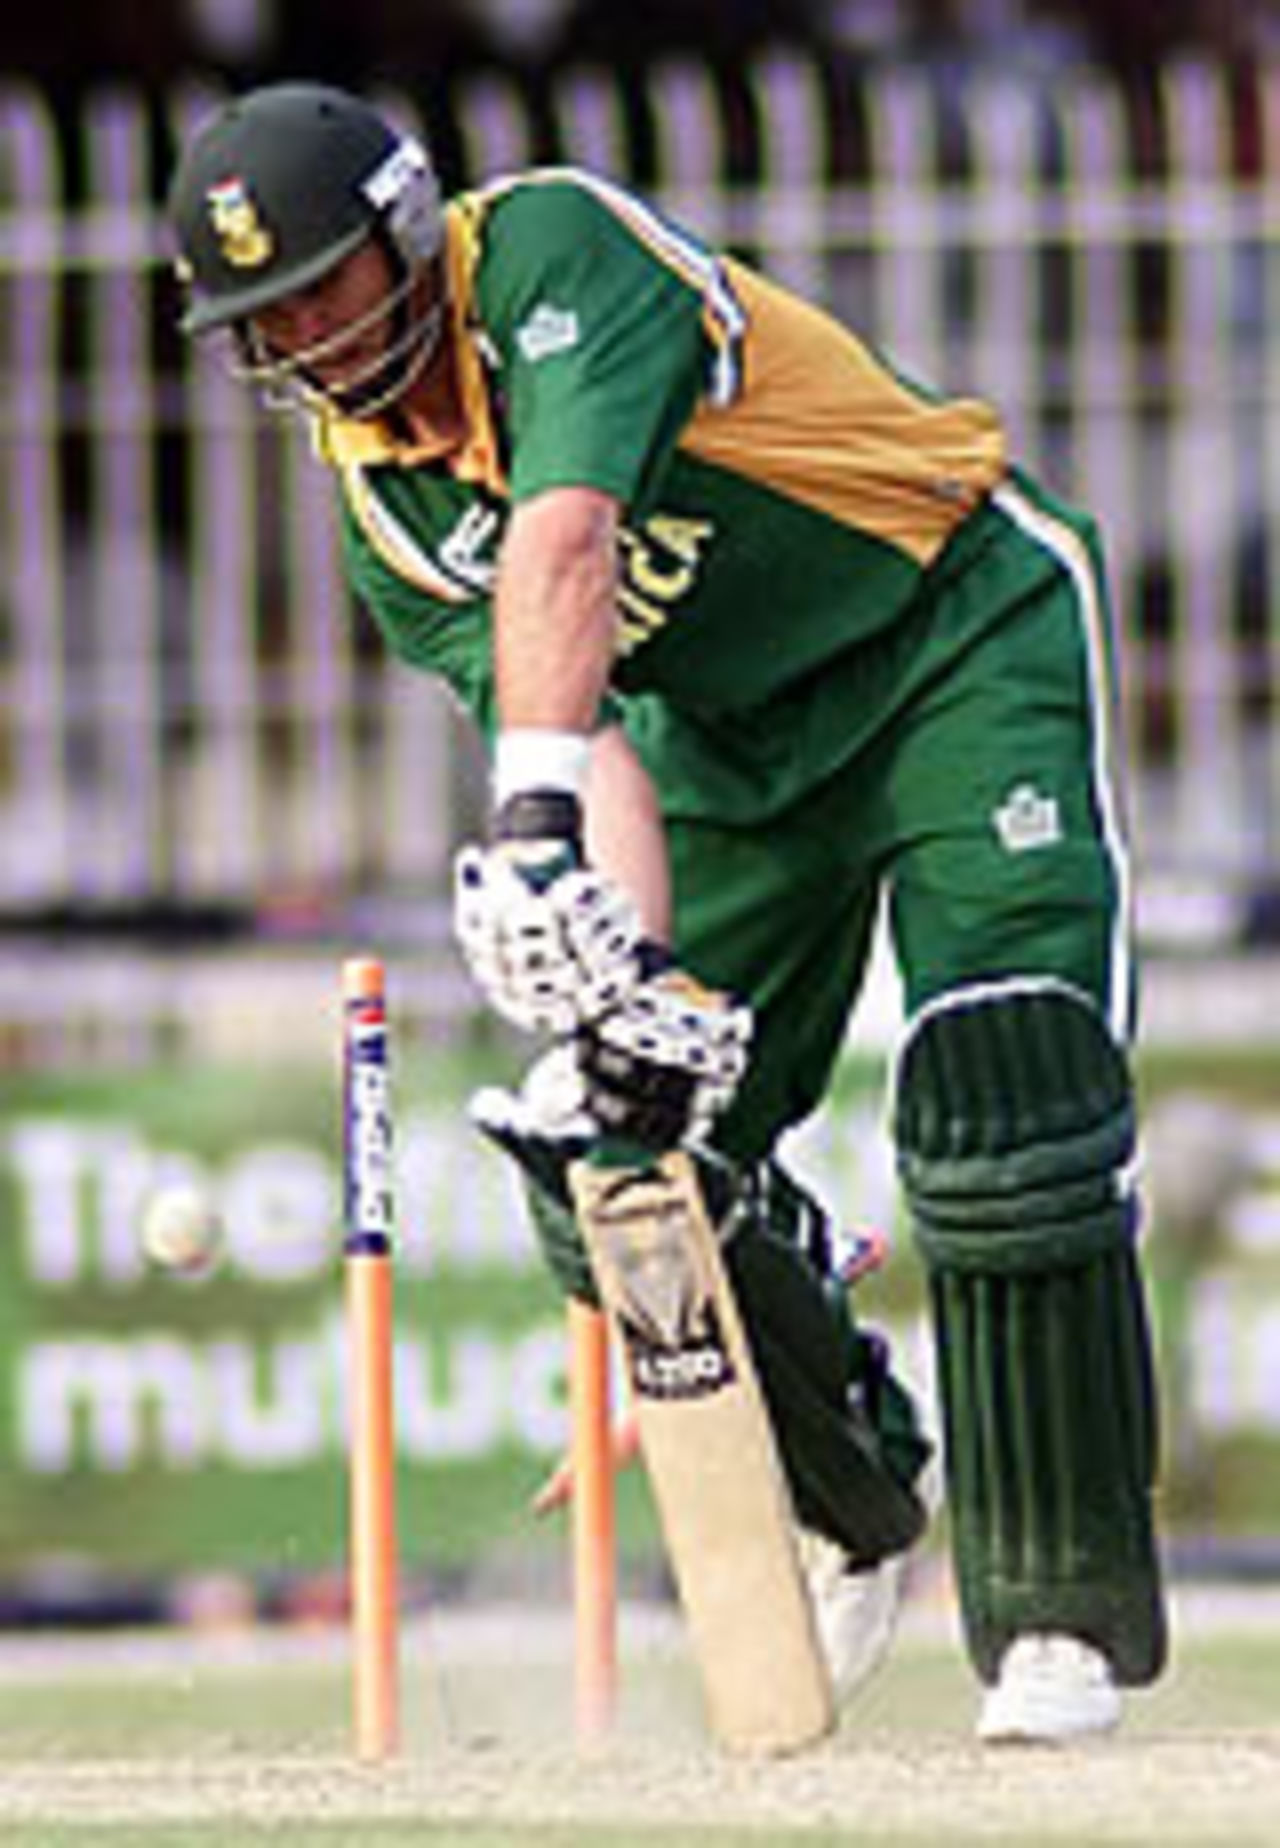 Jacques Kallis (62) loses his middle stump to a Shoaib Akhtar yorker, Pakistan v South Africa, 3rd ODI, Faisalabad, October 7, 2003.